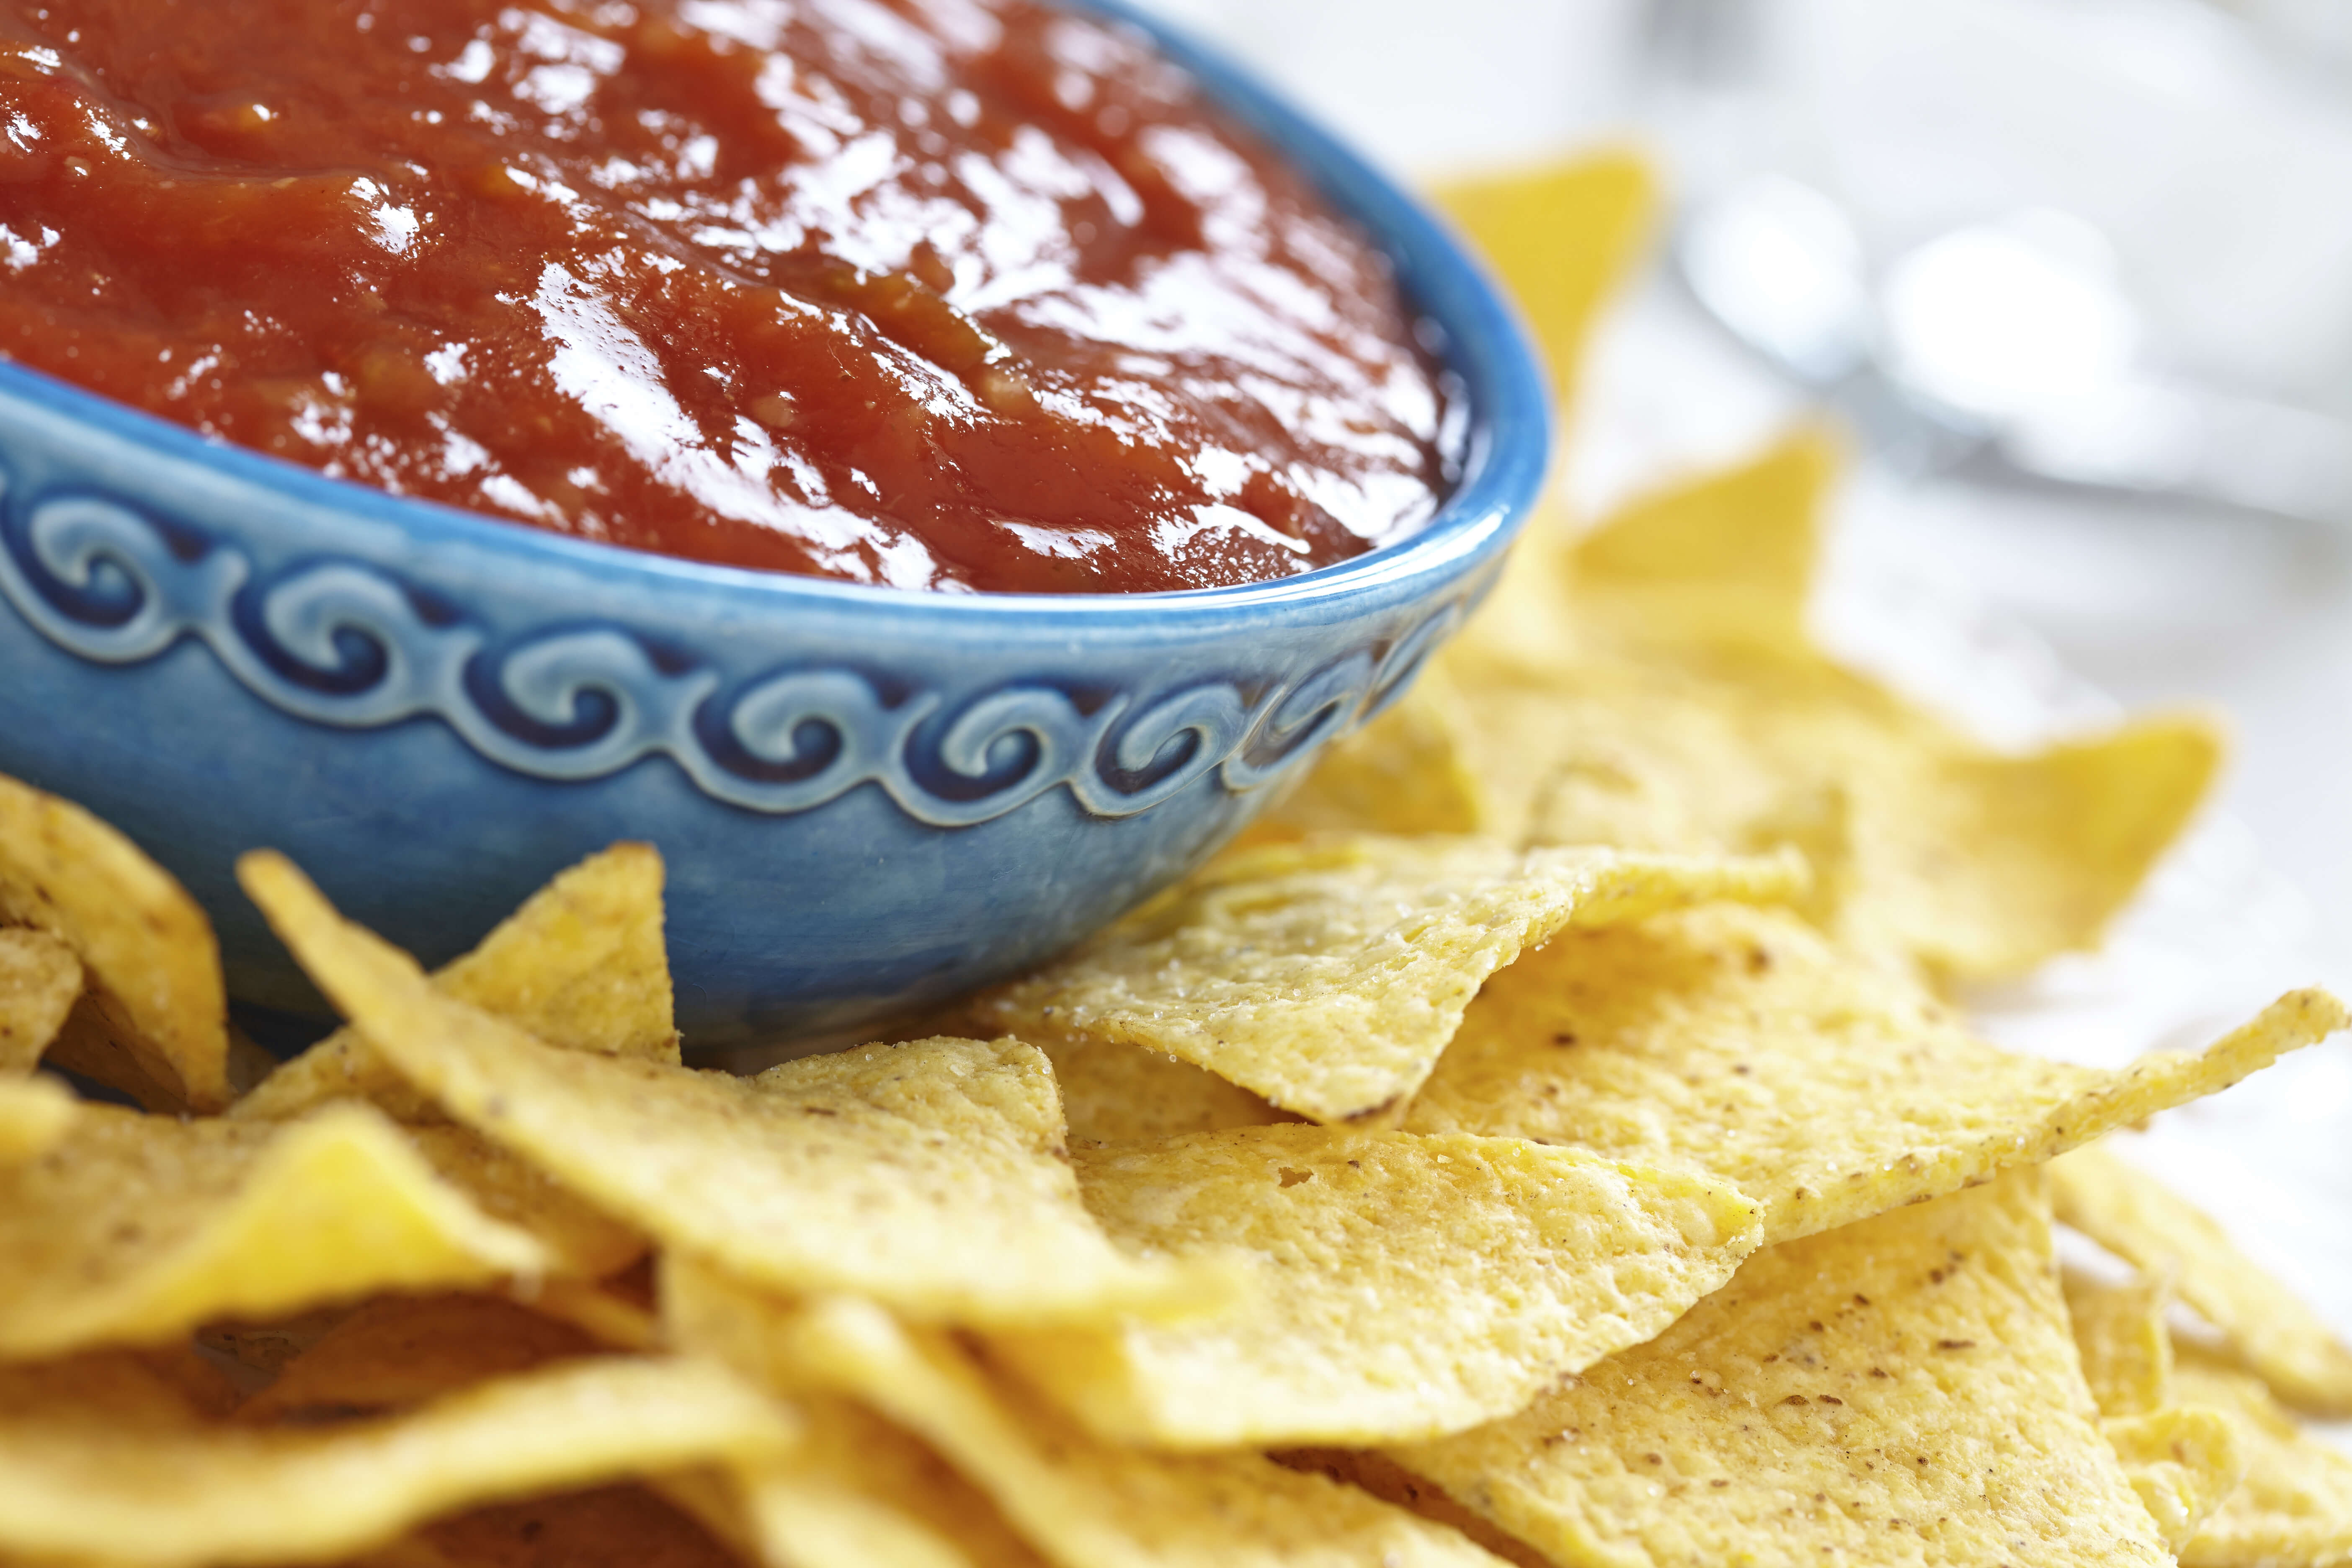 Salsas are a great snack food to have on hand.